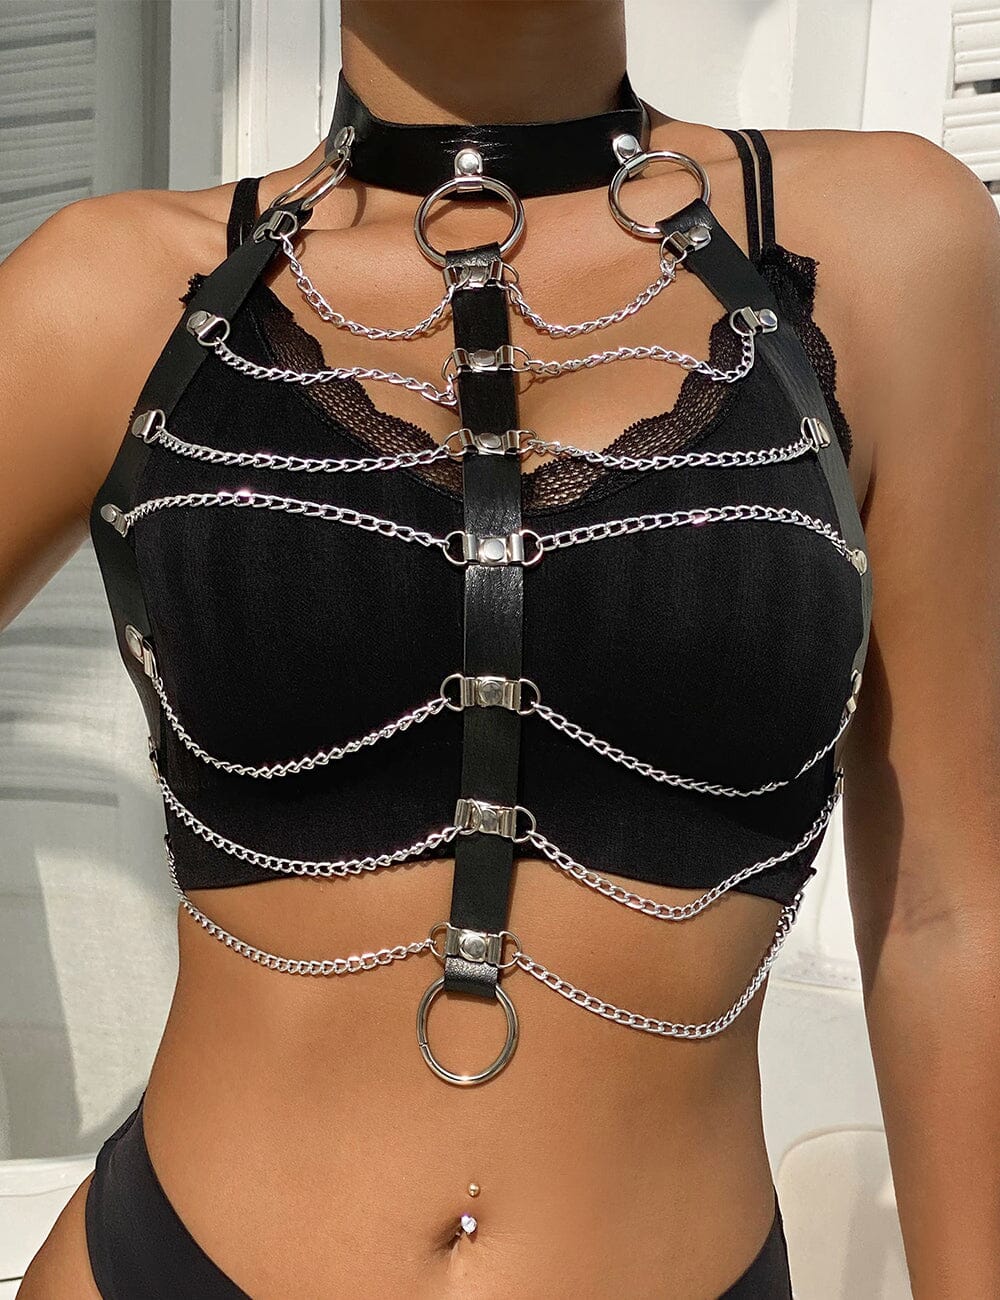 a woman wearing a black top with chains on it